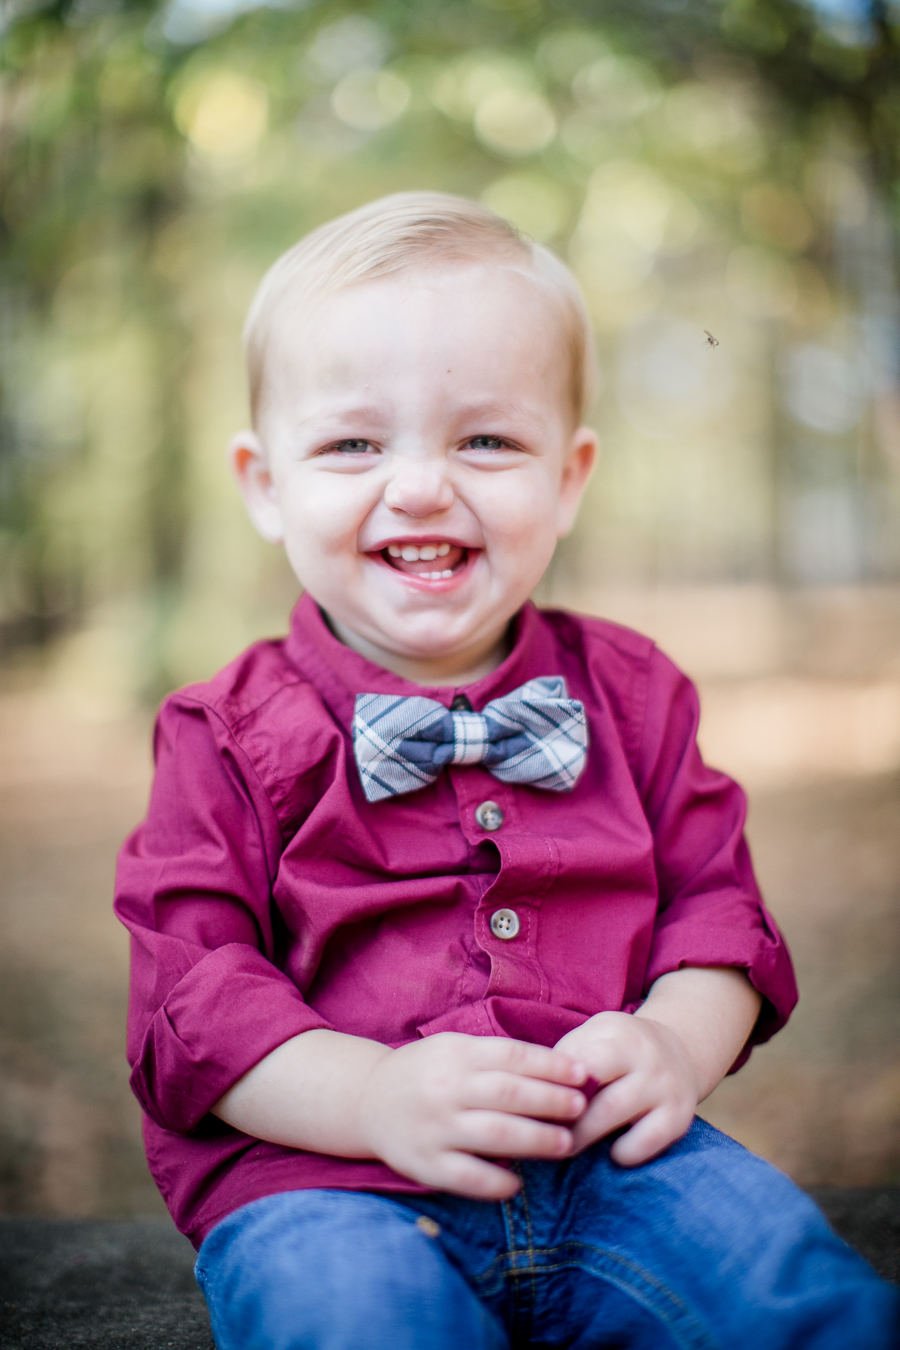 Little boy in a bow tie by Knoxville Wedding Photographer, Amanda May Photos.